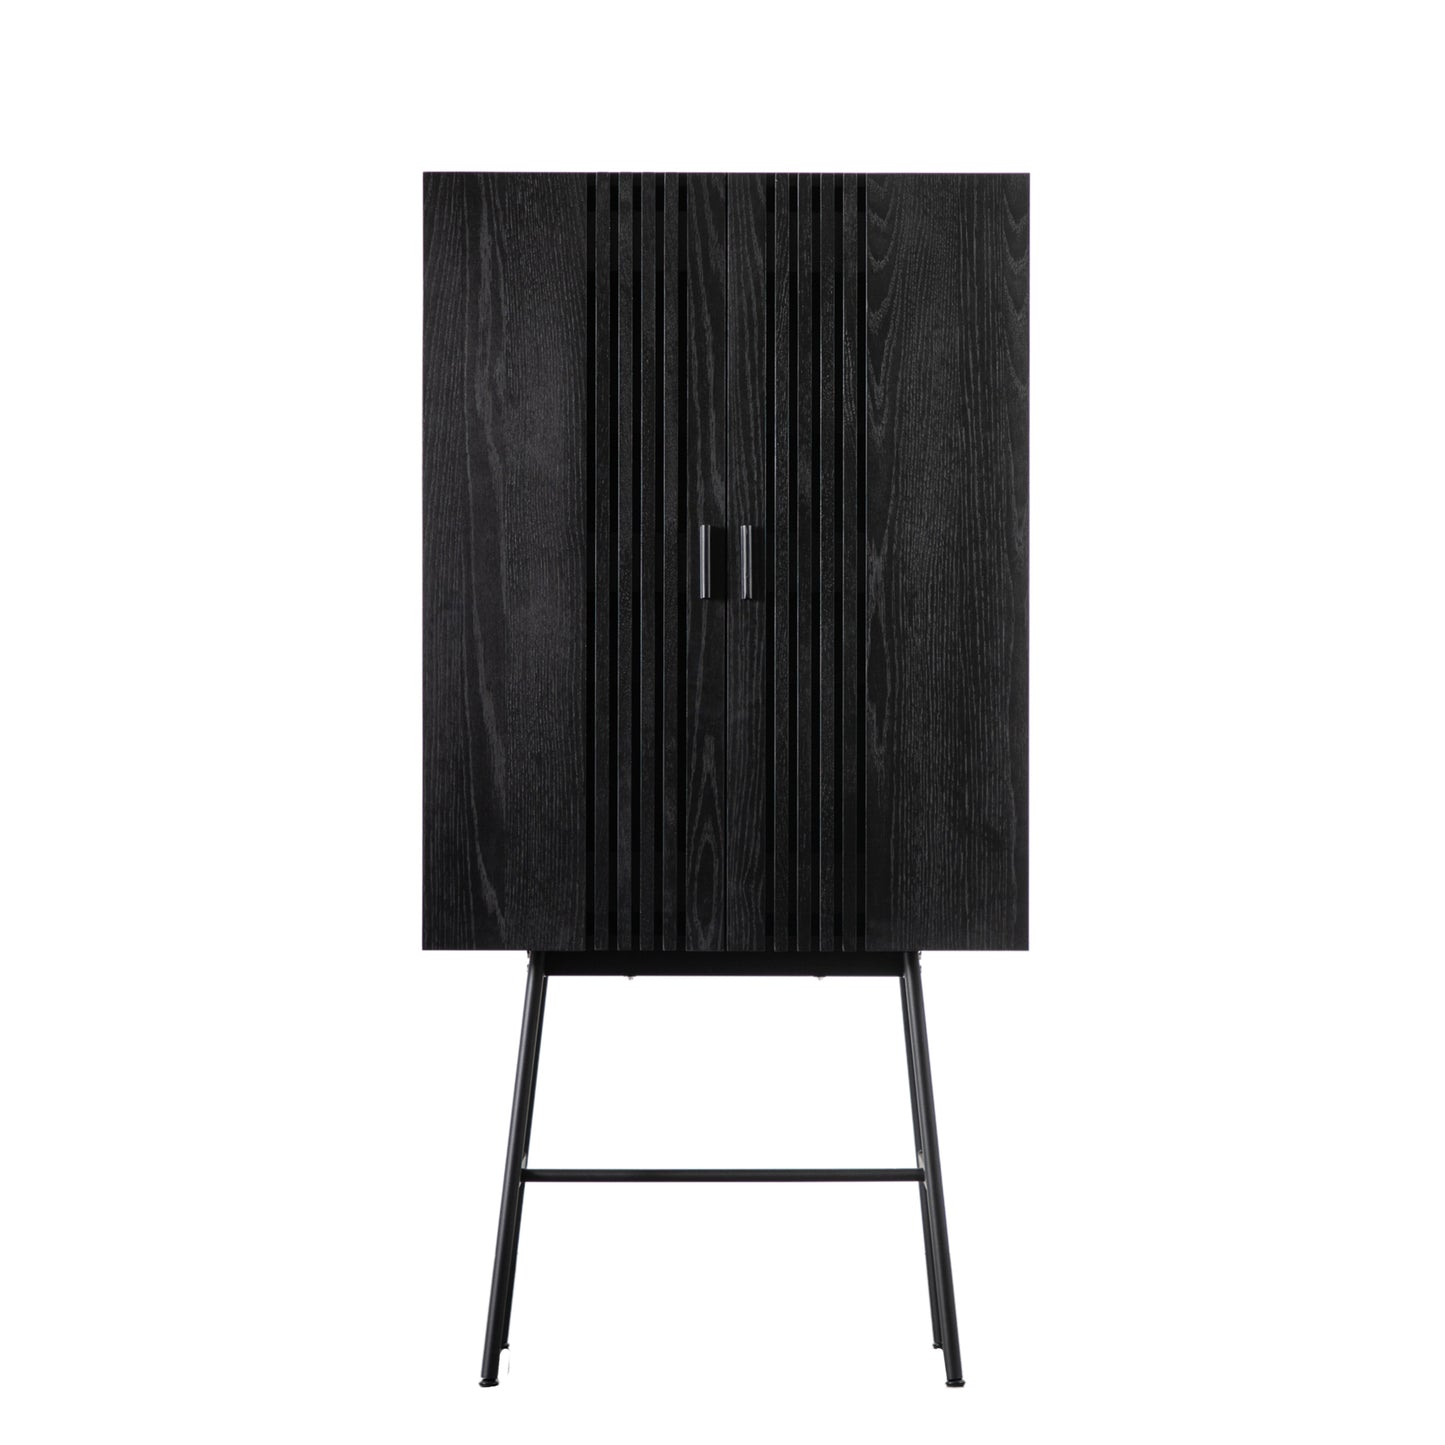 Load image into Gallery viewer, A Holston Drinks Cabinet Black 800x420x1600mm by Kikiathome.co.uk for interior decor.
